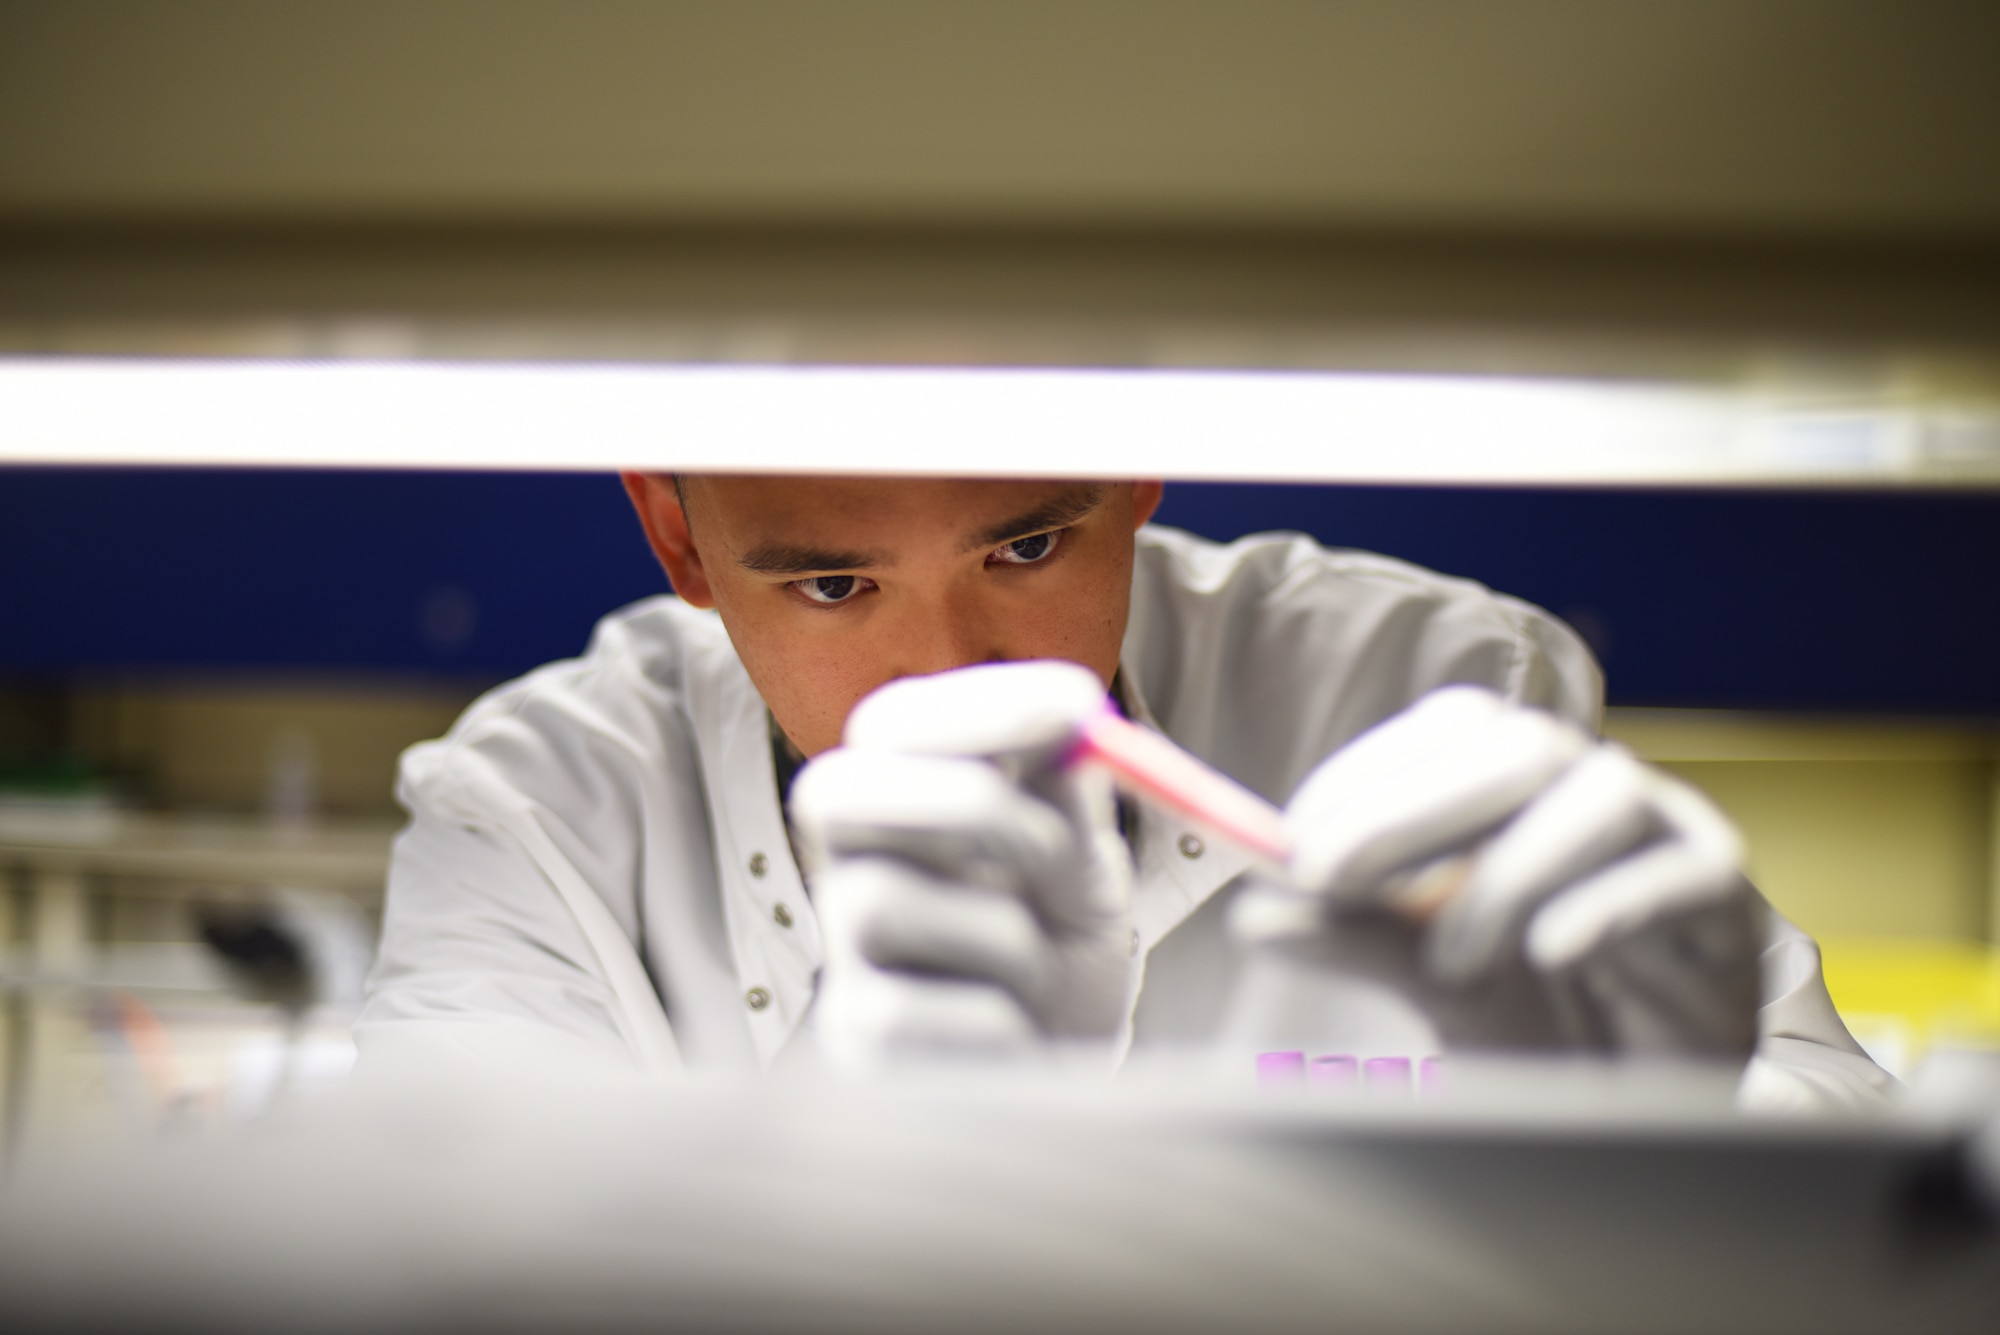 Senior Airman Philip Fisketjon, 341st Medical Group medical laboratory technician, examines a complete blood count August 13, 2019, at the laboratory on Malmstrom Air Force Base, Mont.